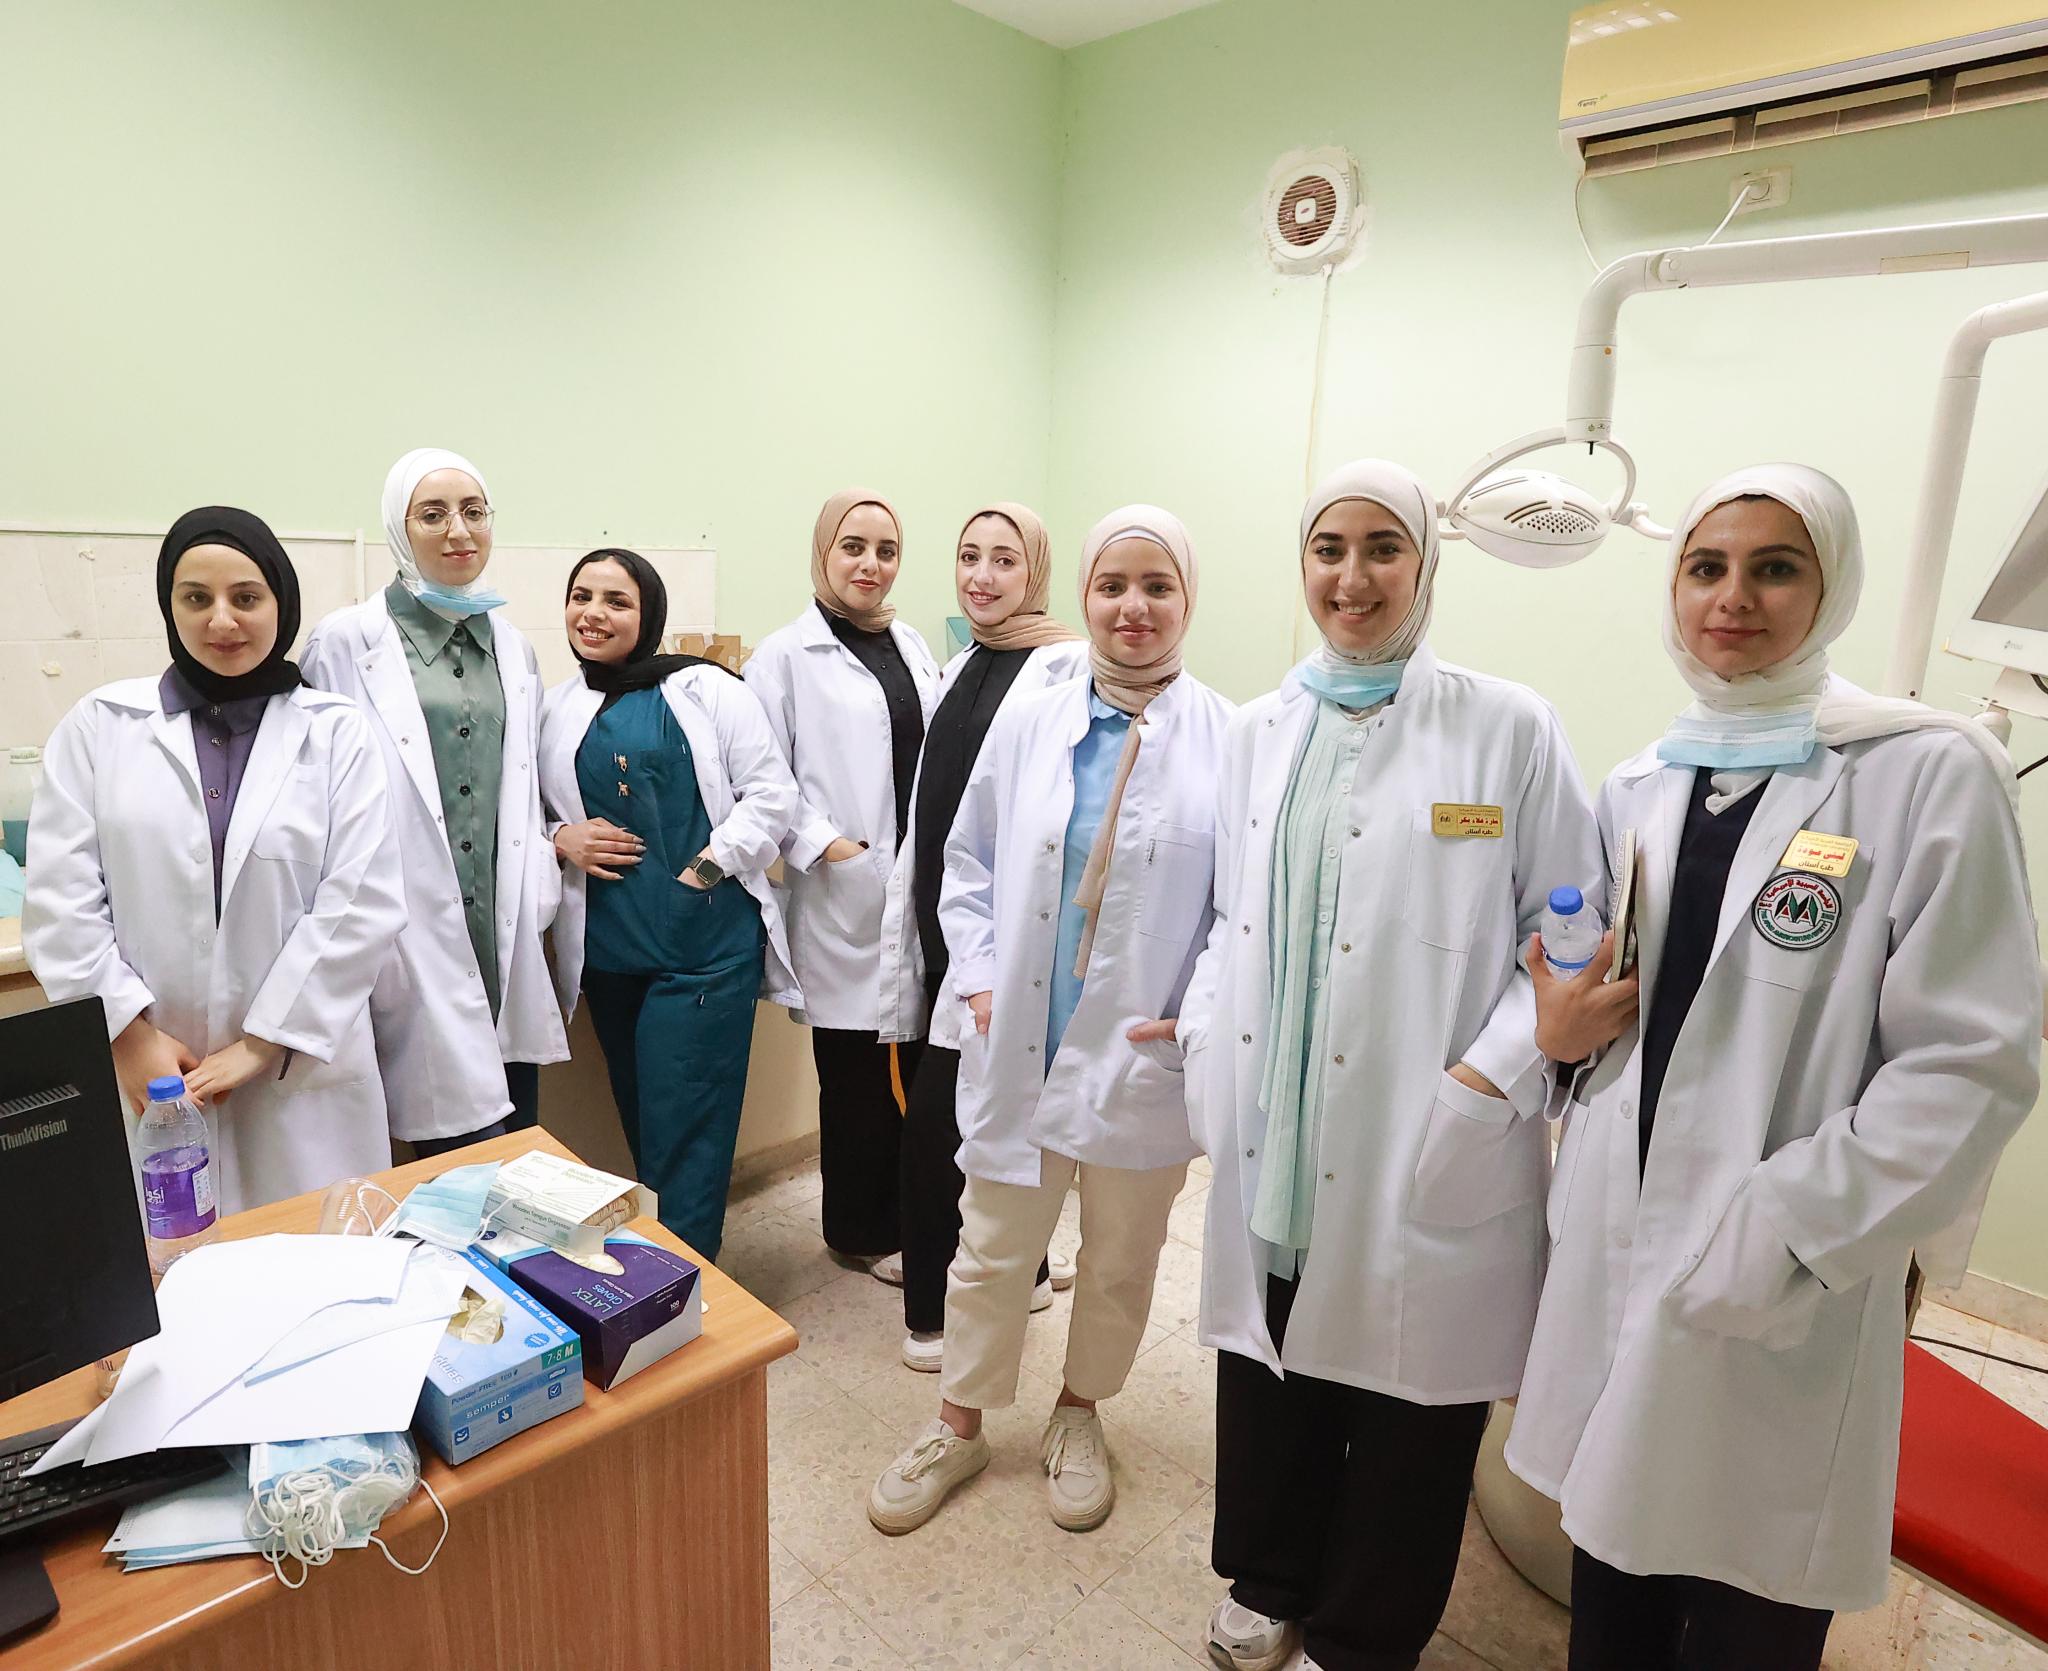 The Arab American University Holds a Free Medical Day in the Northern Jordan Valley